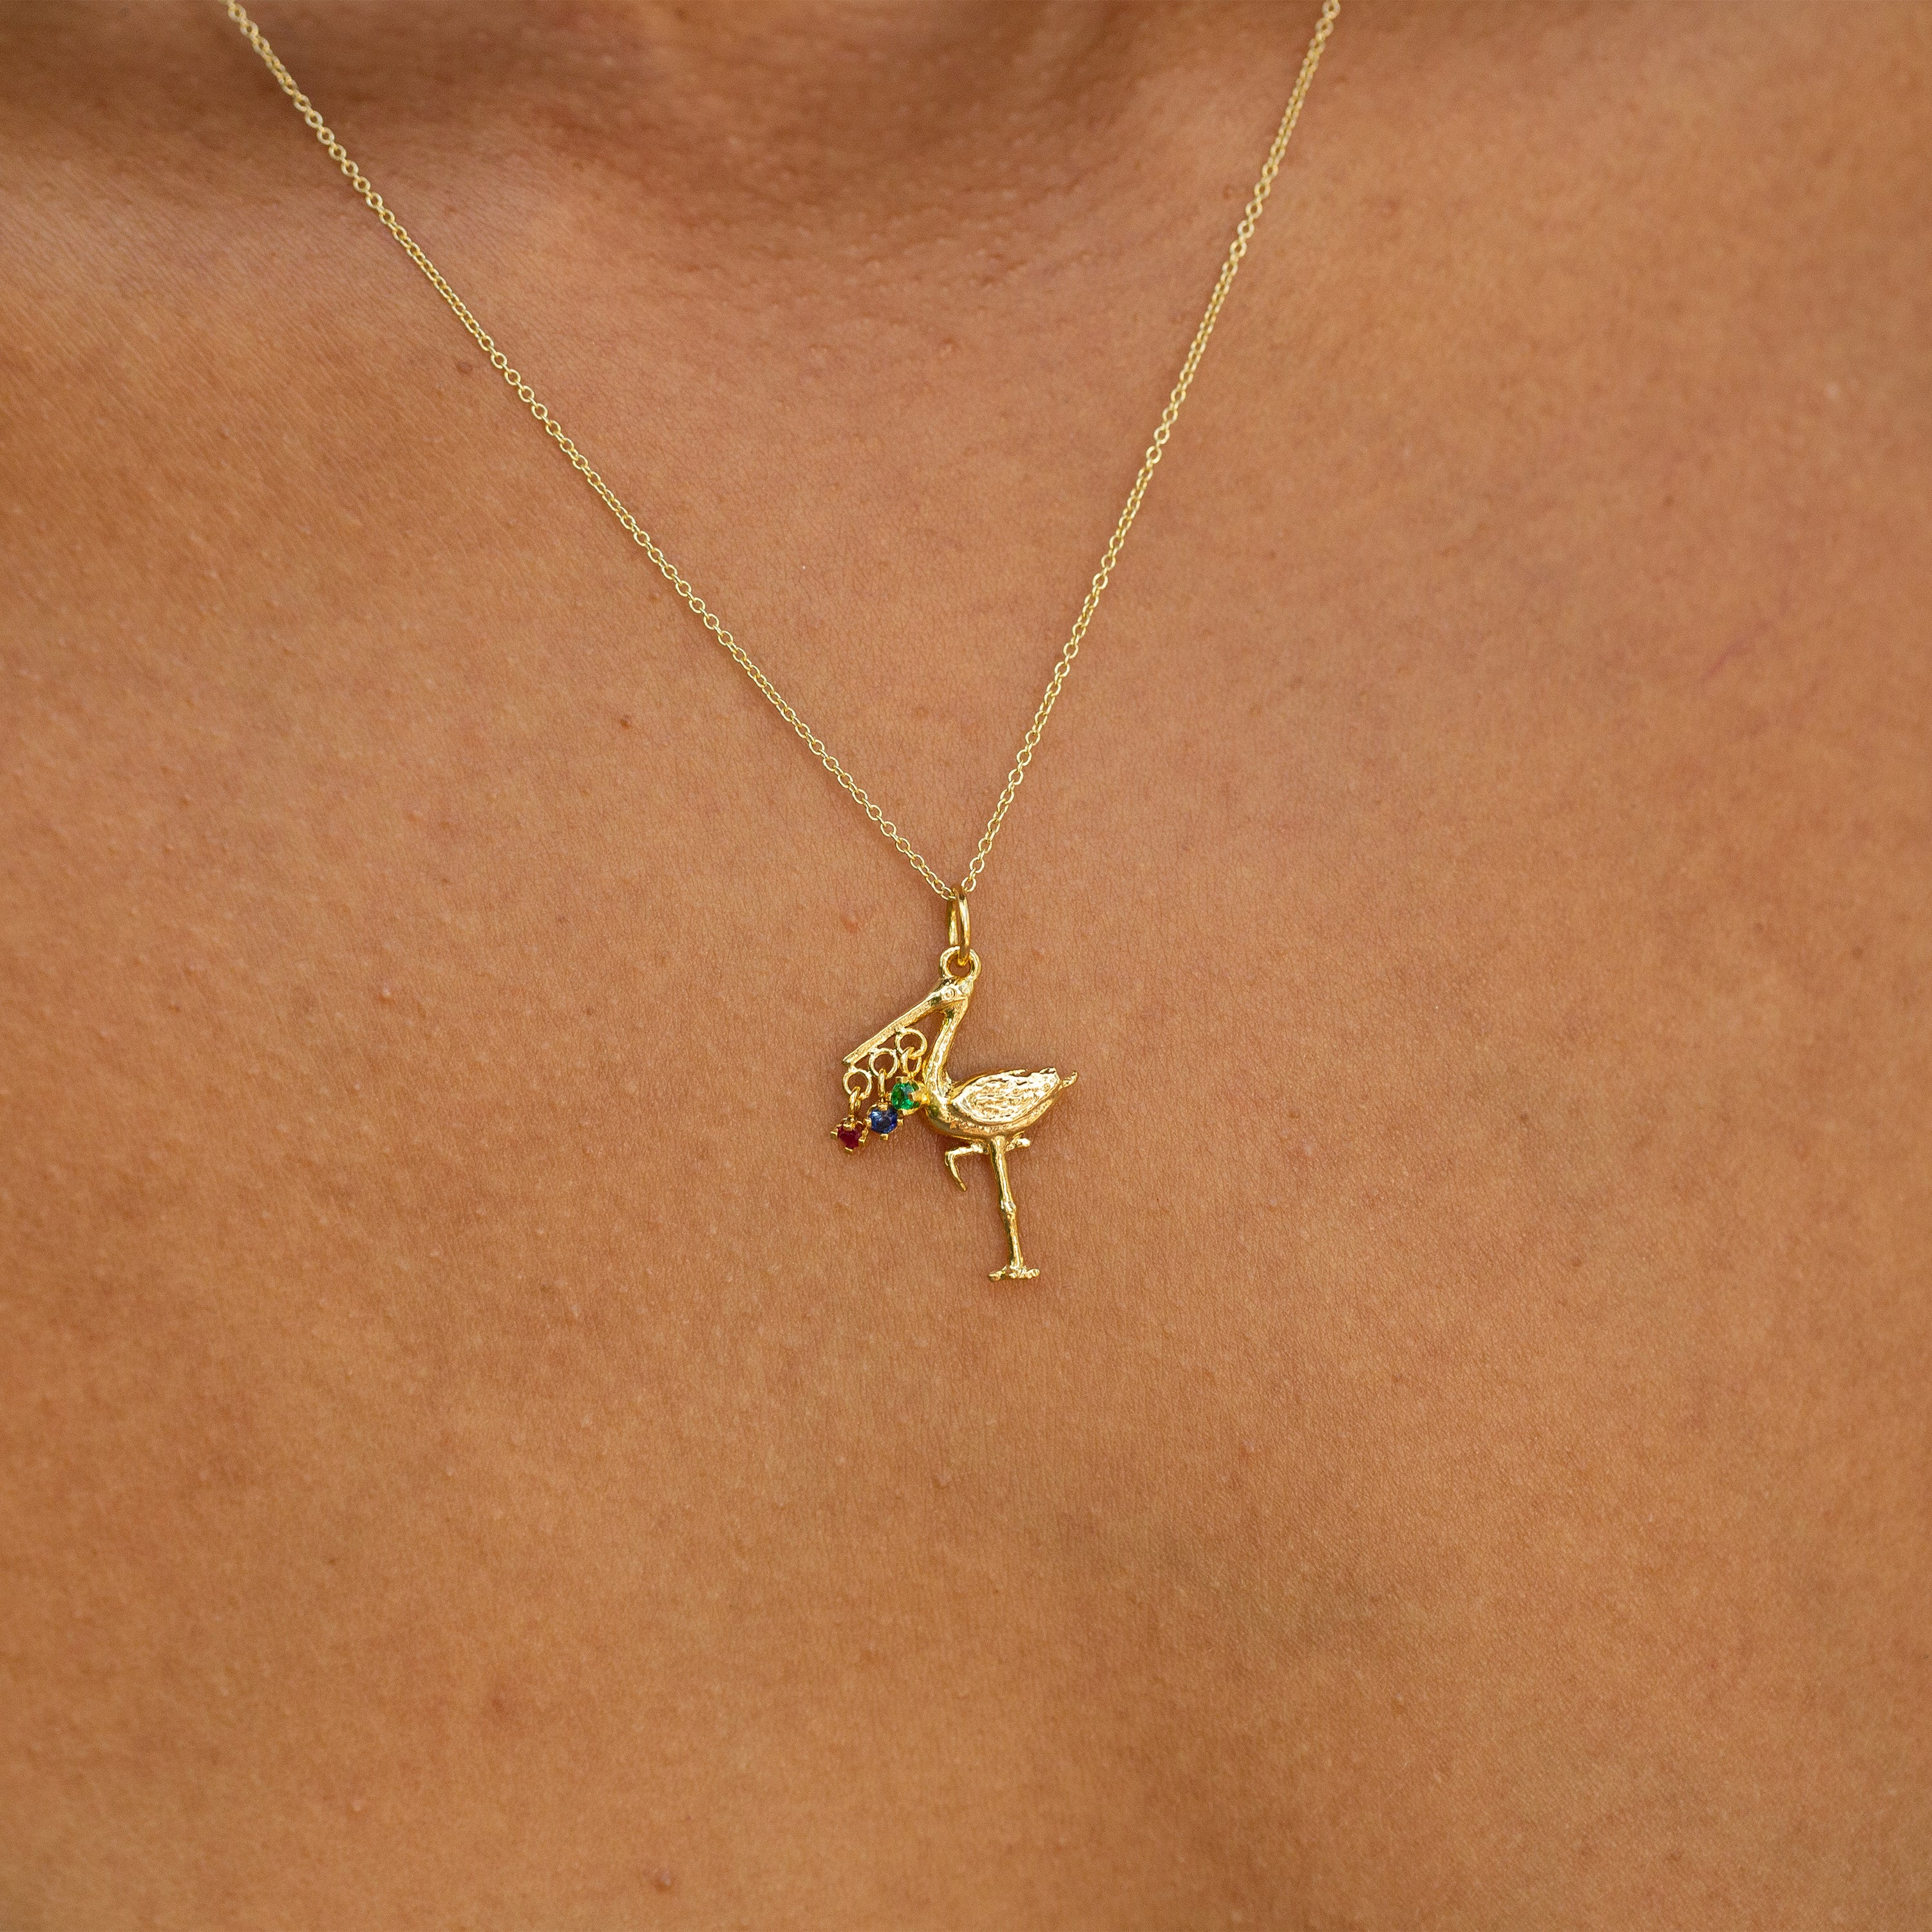 The F&B White Gold Birthstone Stork Necklace